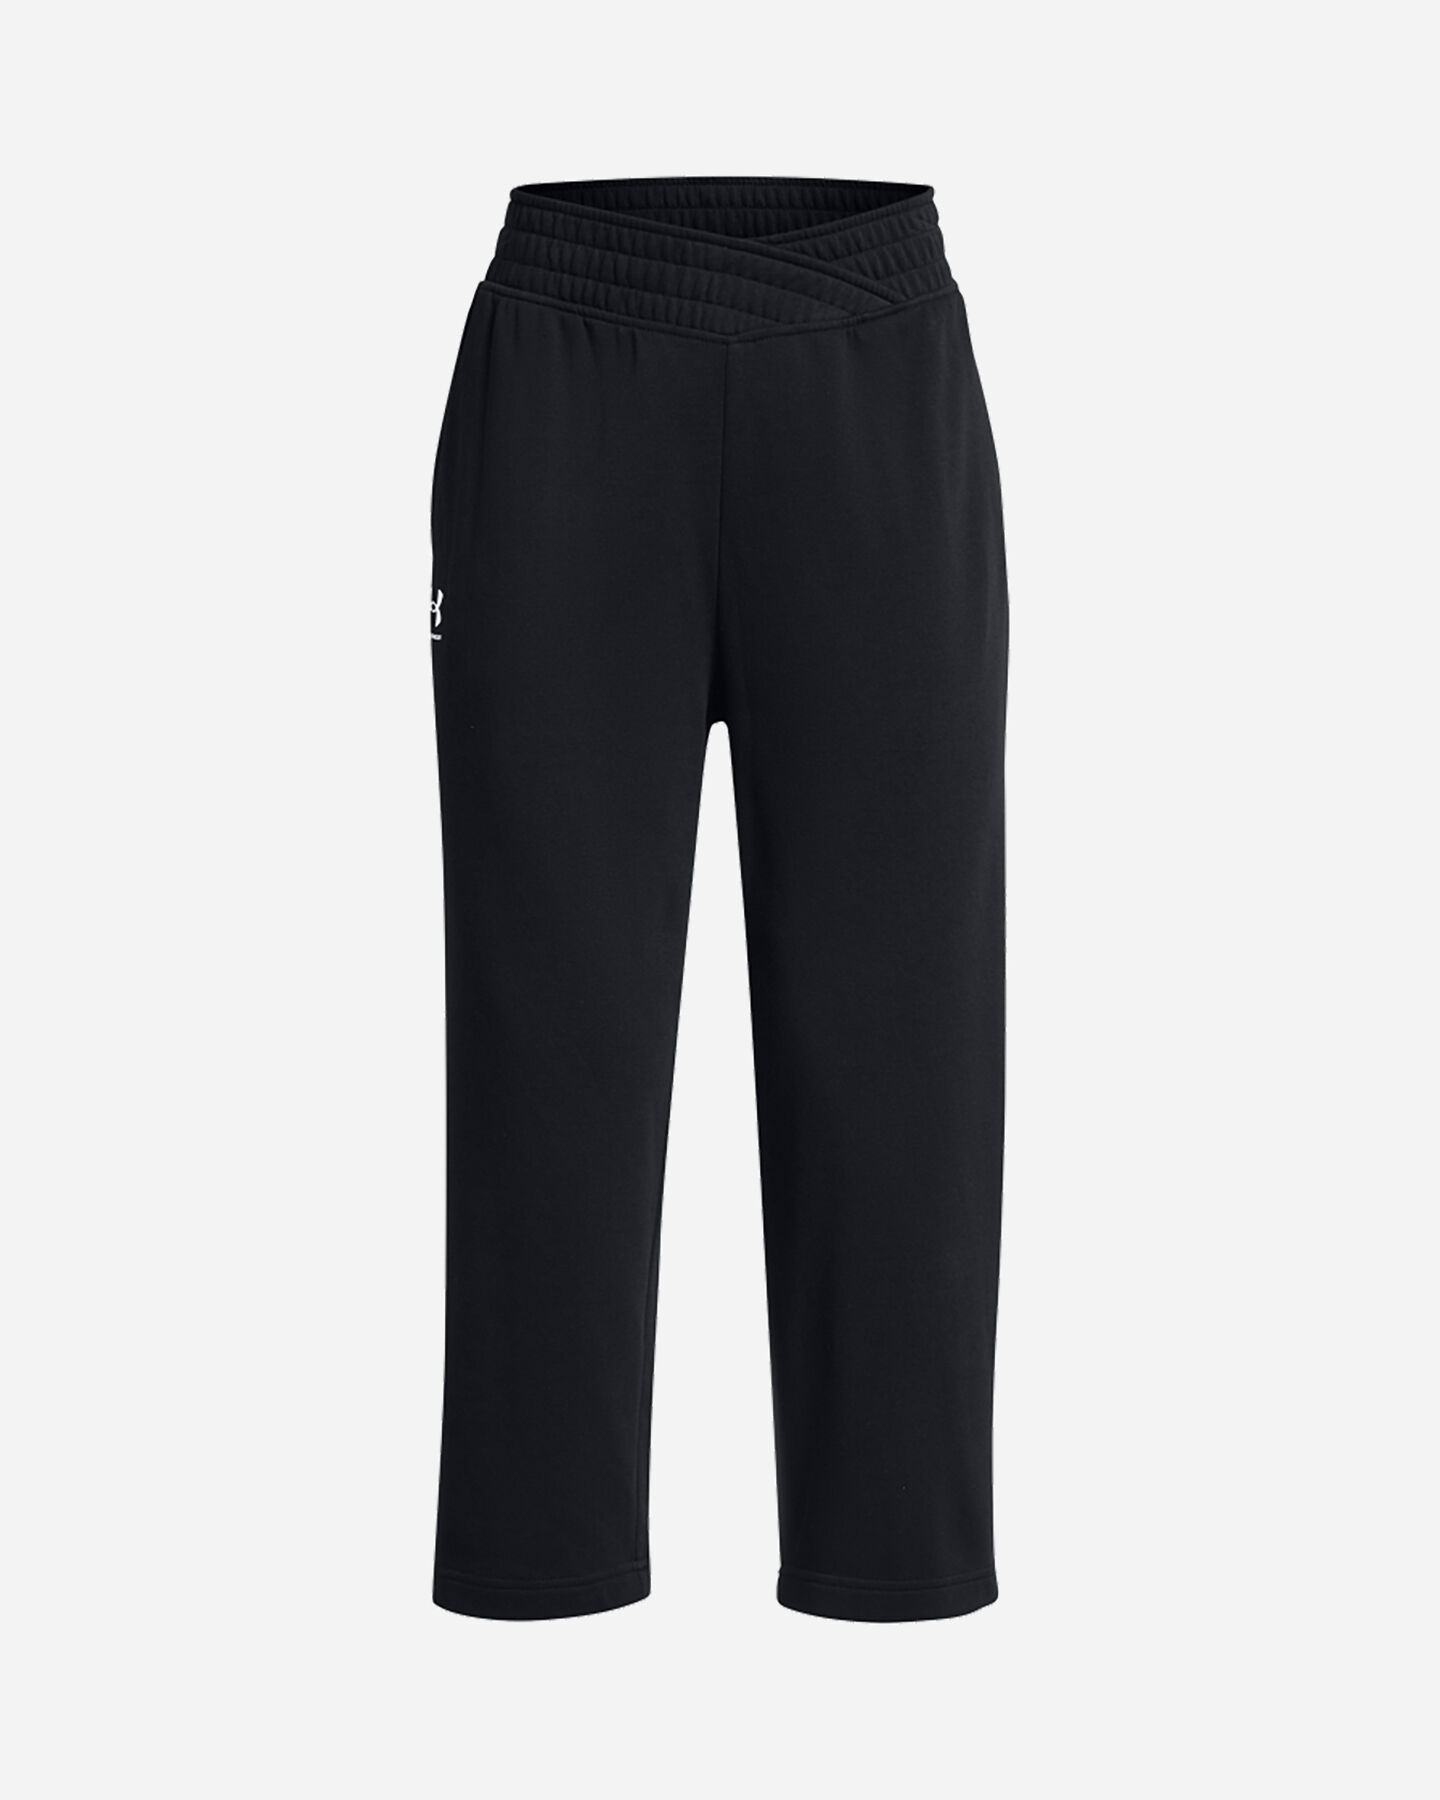  Pantalone UNDER ARMOUR RIVAL TERRY W S5641562|0001|XS scatto 0